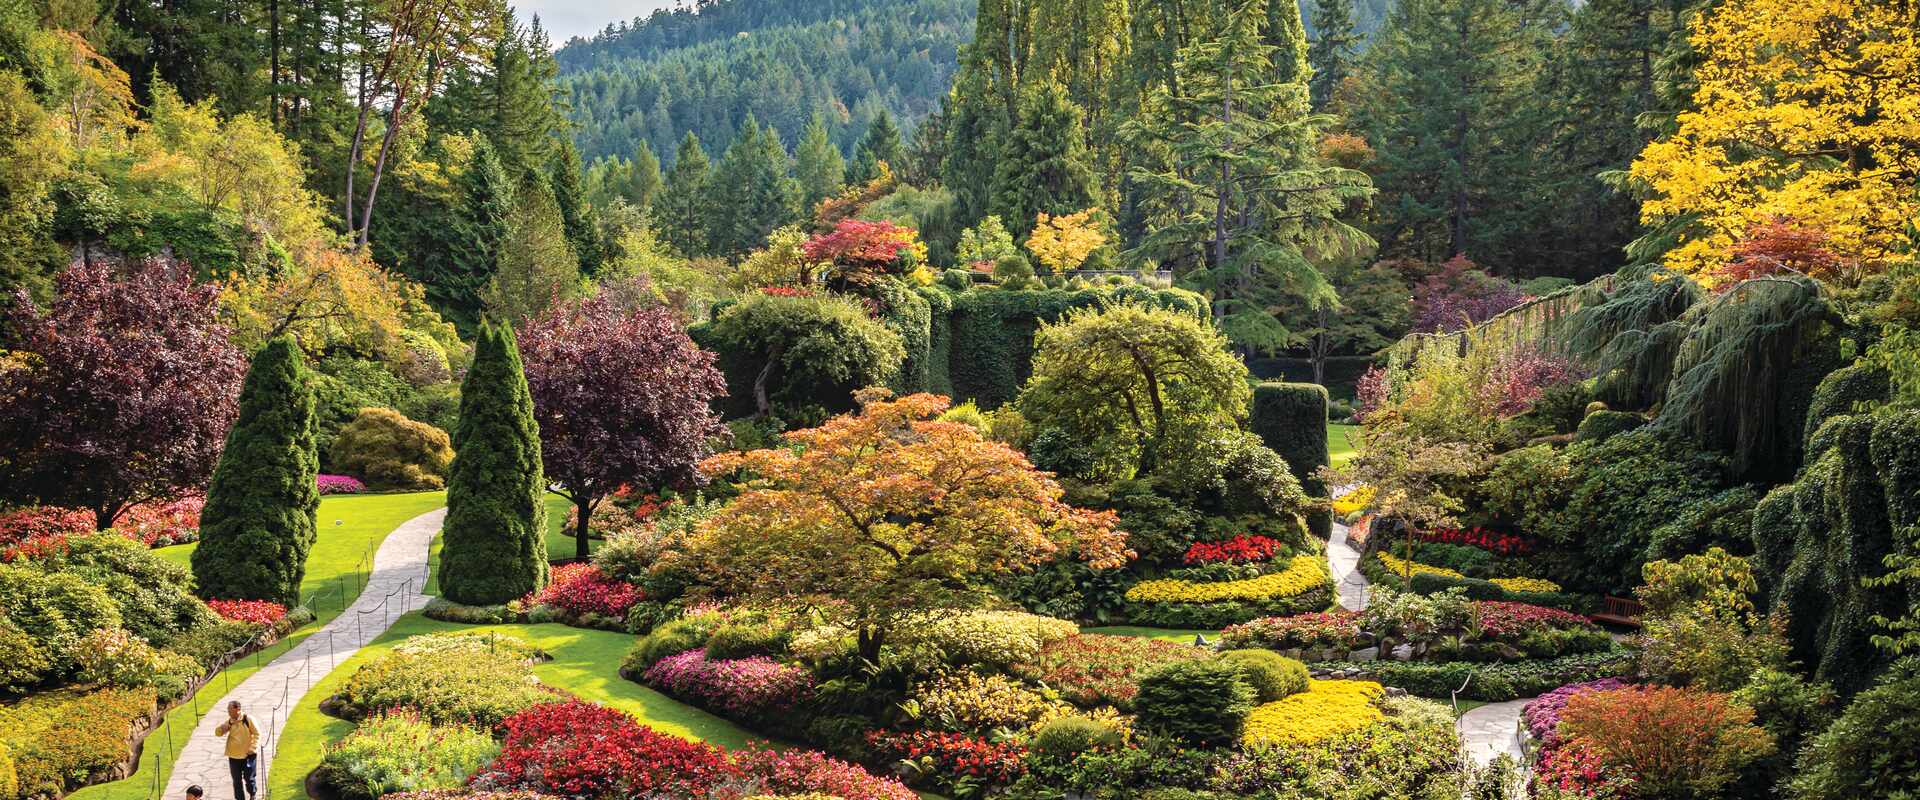 View looking down over the colourful Butchart Gardens in Canada